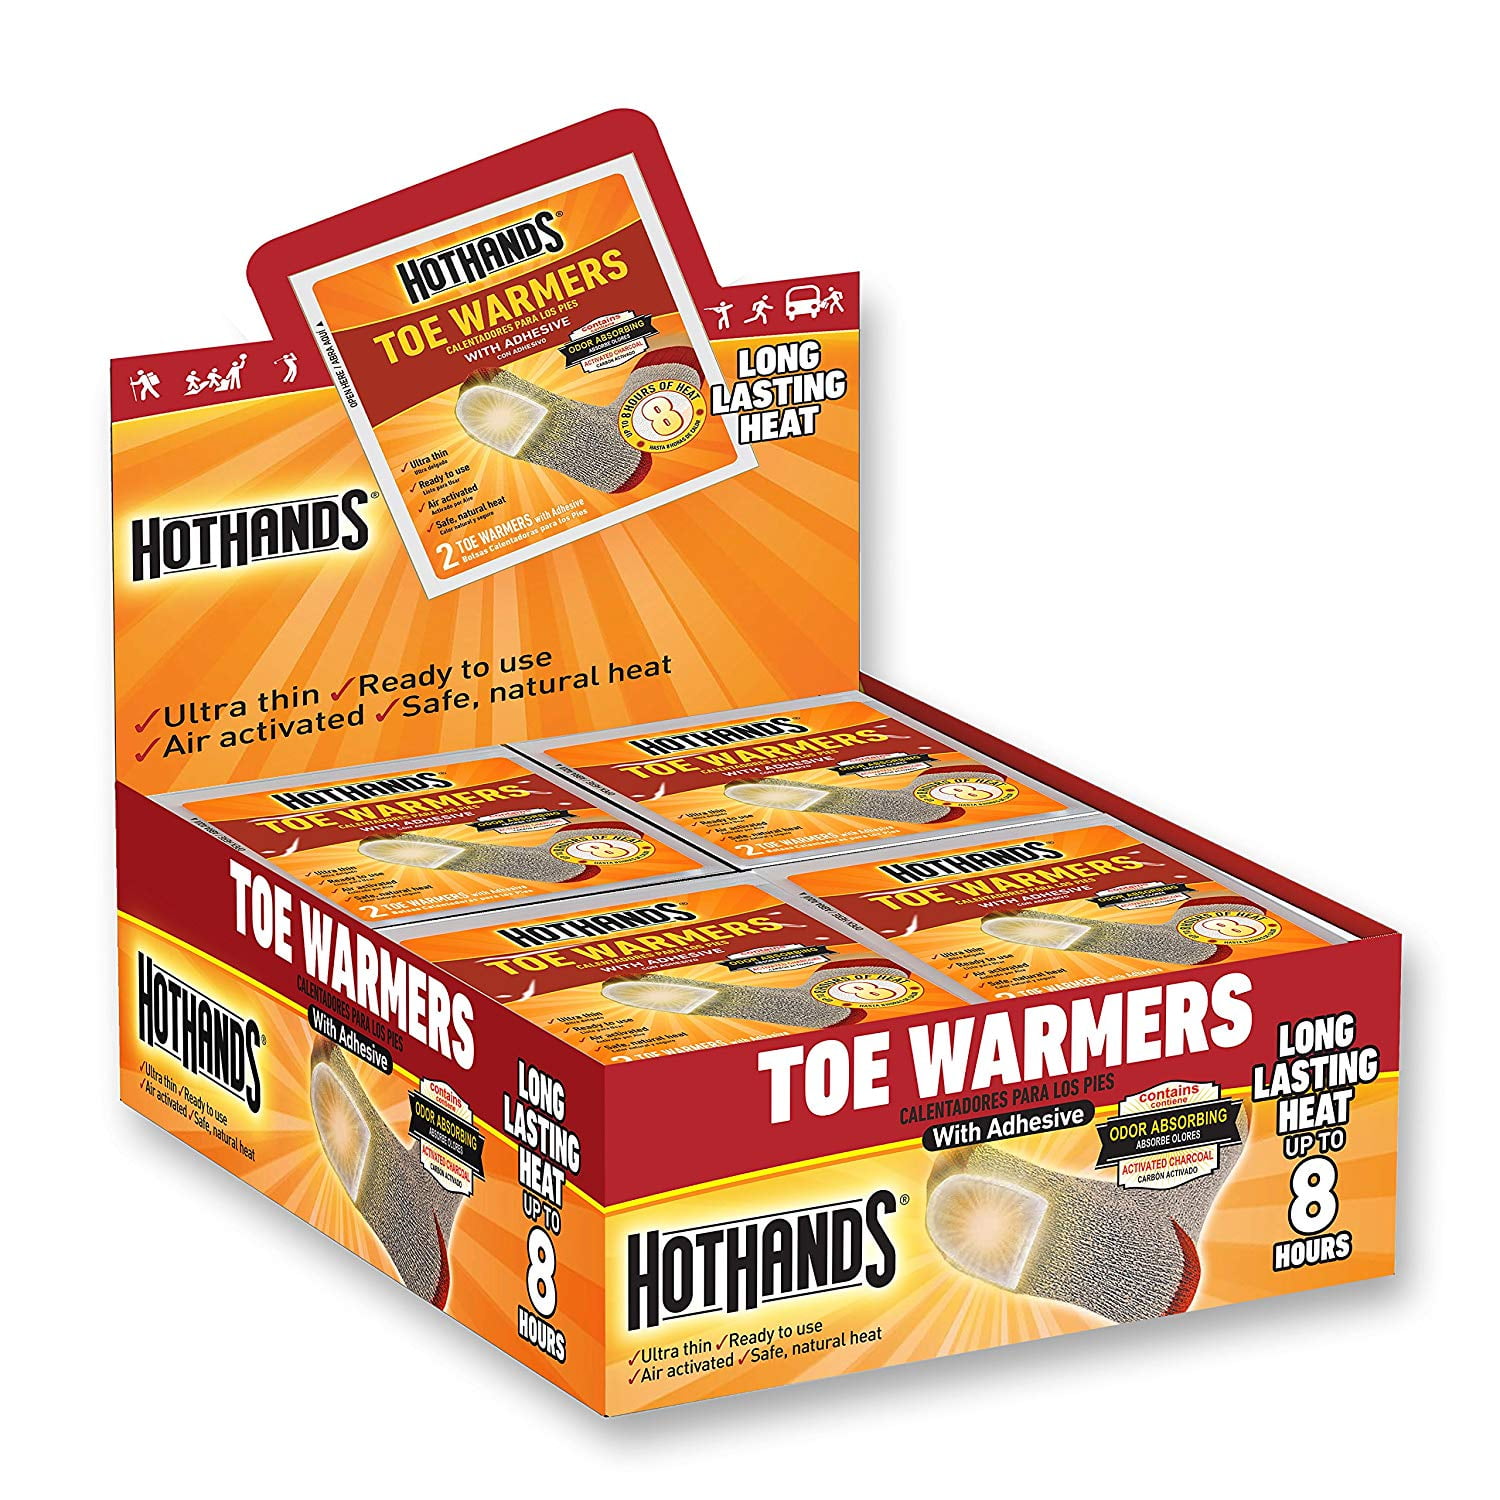 Details about   HotHands Hand Warmers Air Activated Safe Natural Pocket Heat 